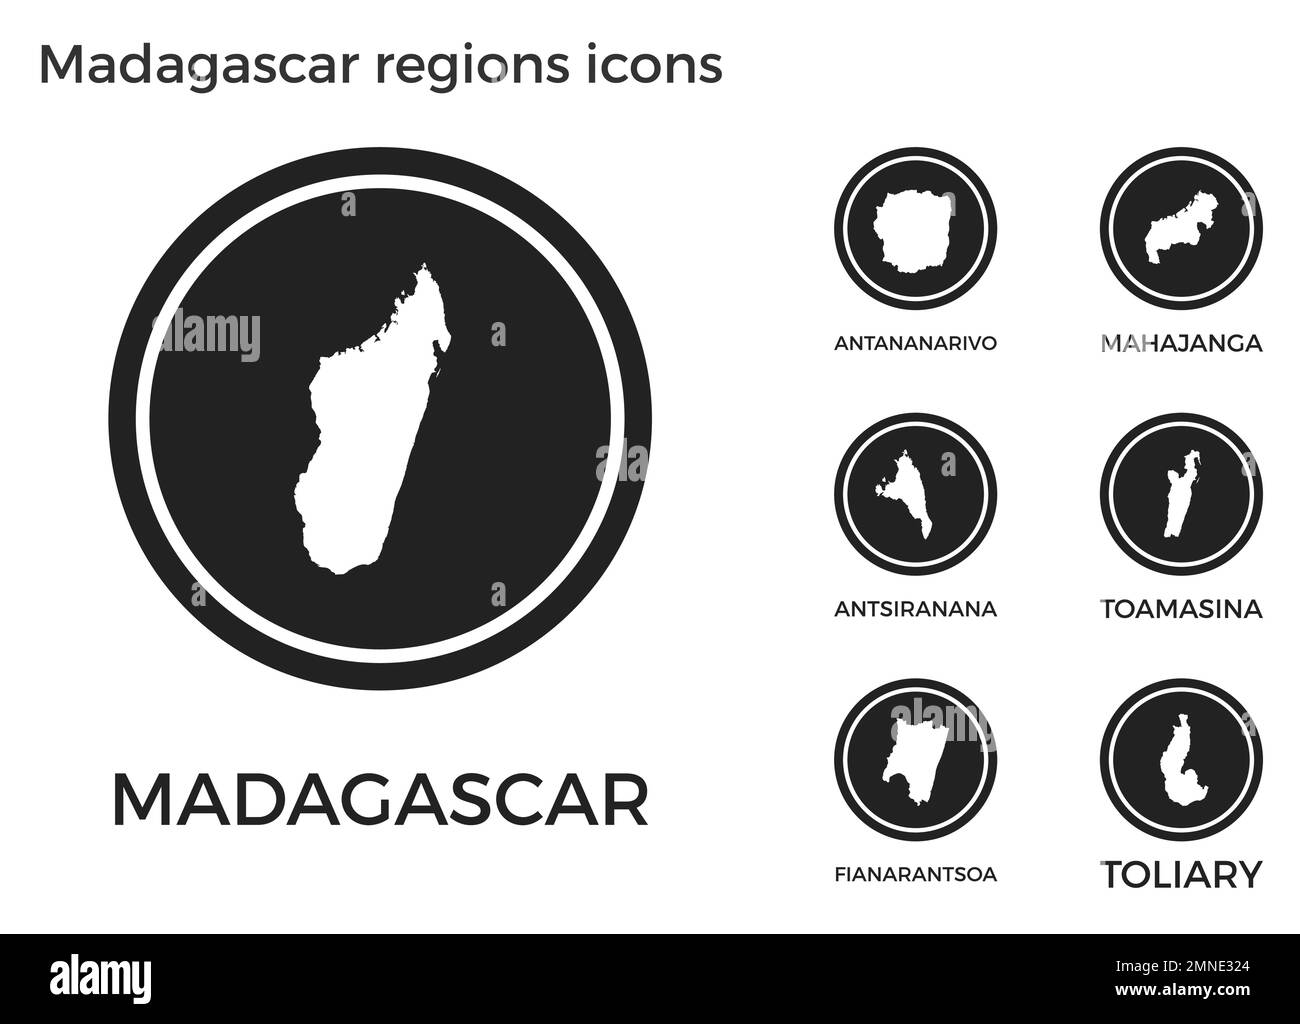 Madagascar regions icons. Black round logos with country regions maps and titles. Vector illustration. Stock Vector